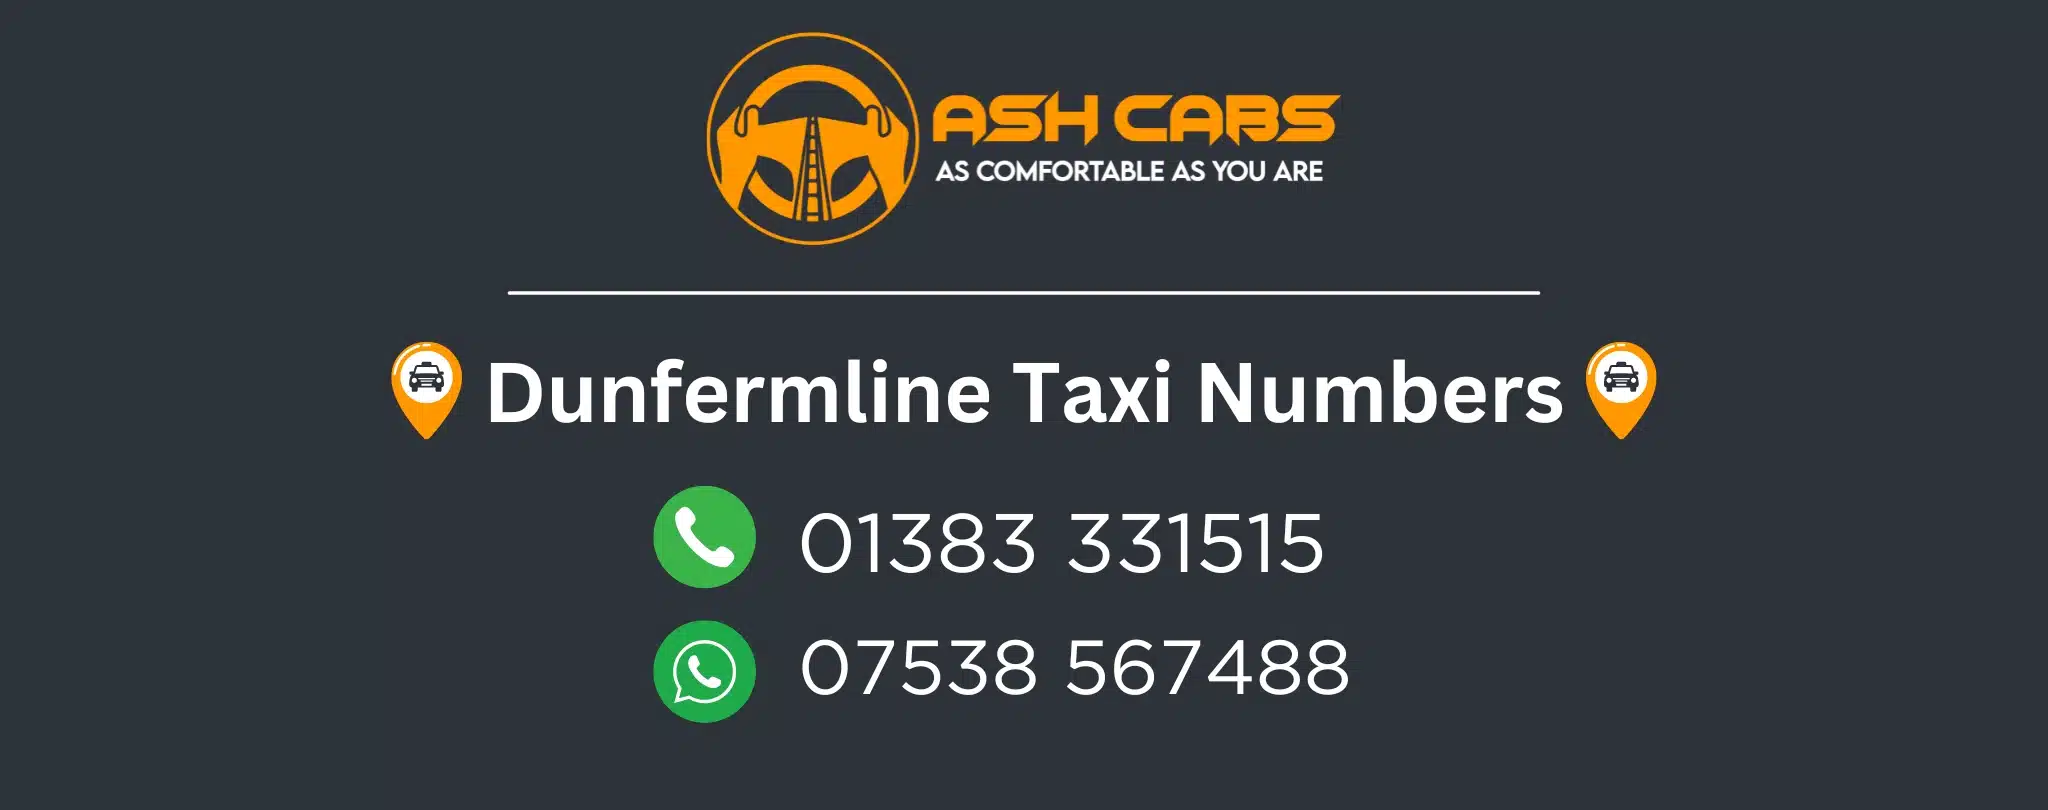 Dunfermline Taxi Numbers